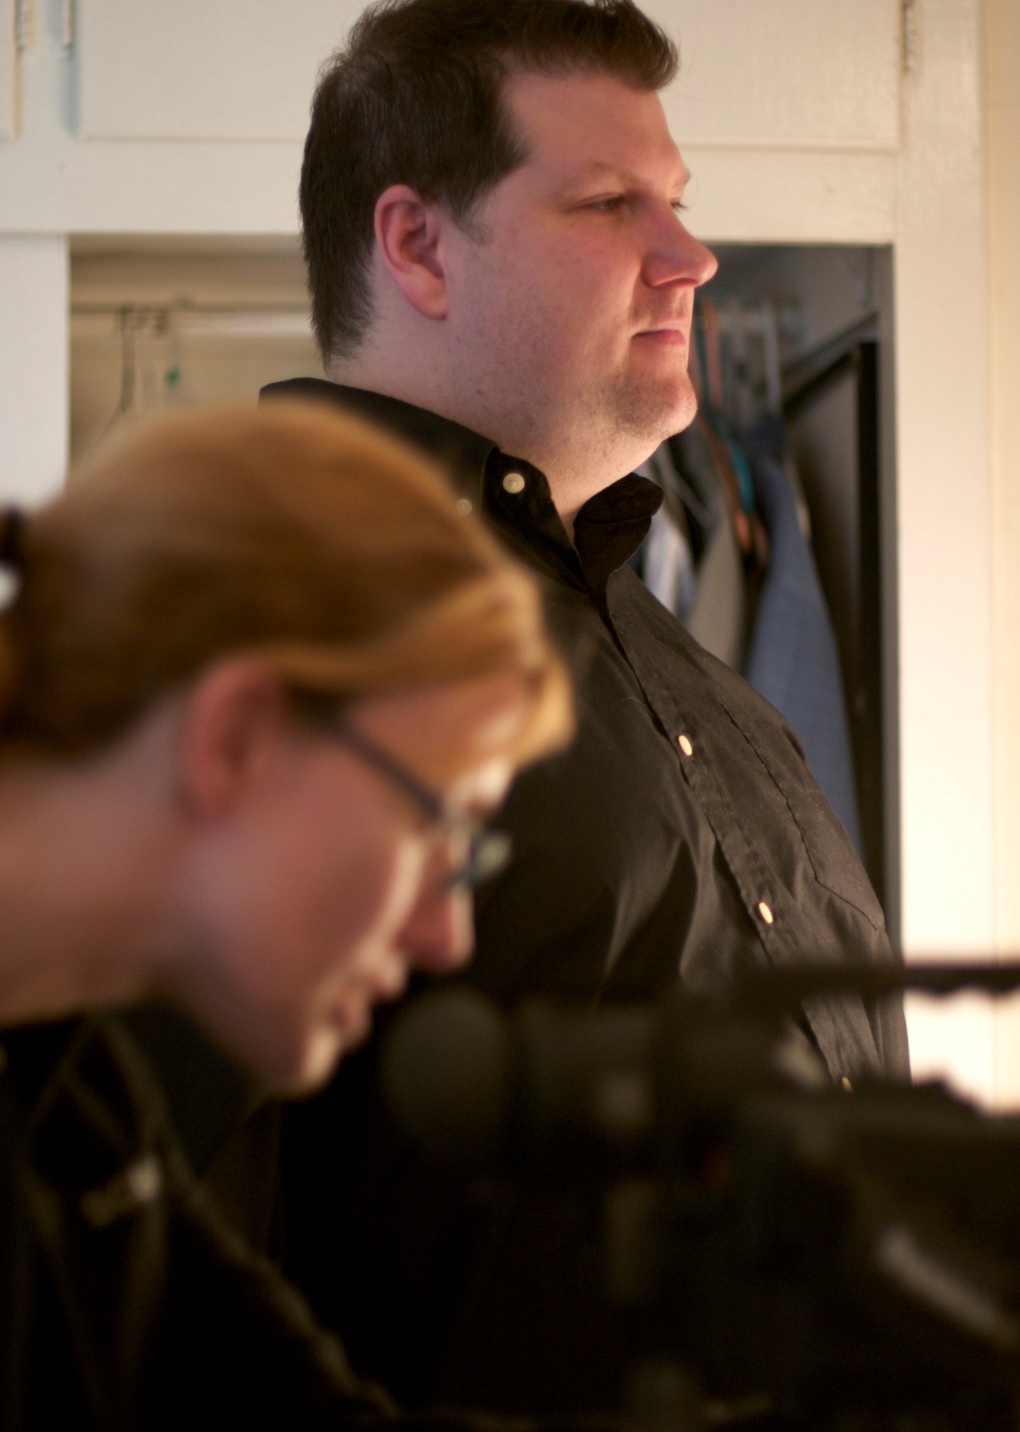 On set of the short film The Talk (2007) as director and producer.